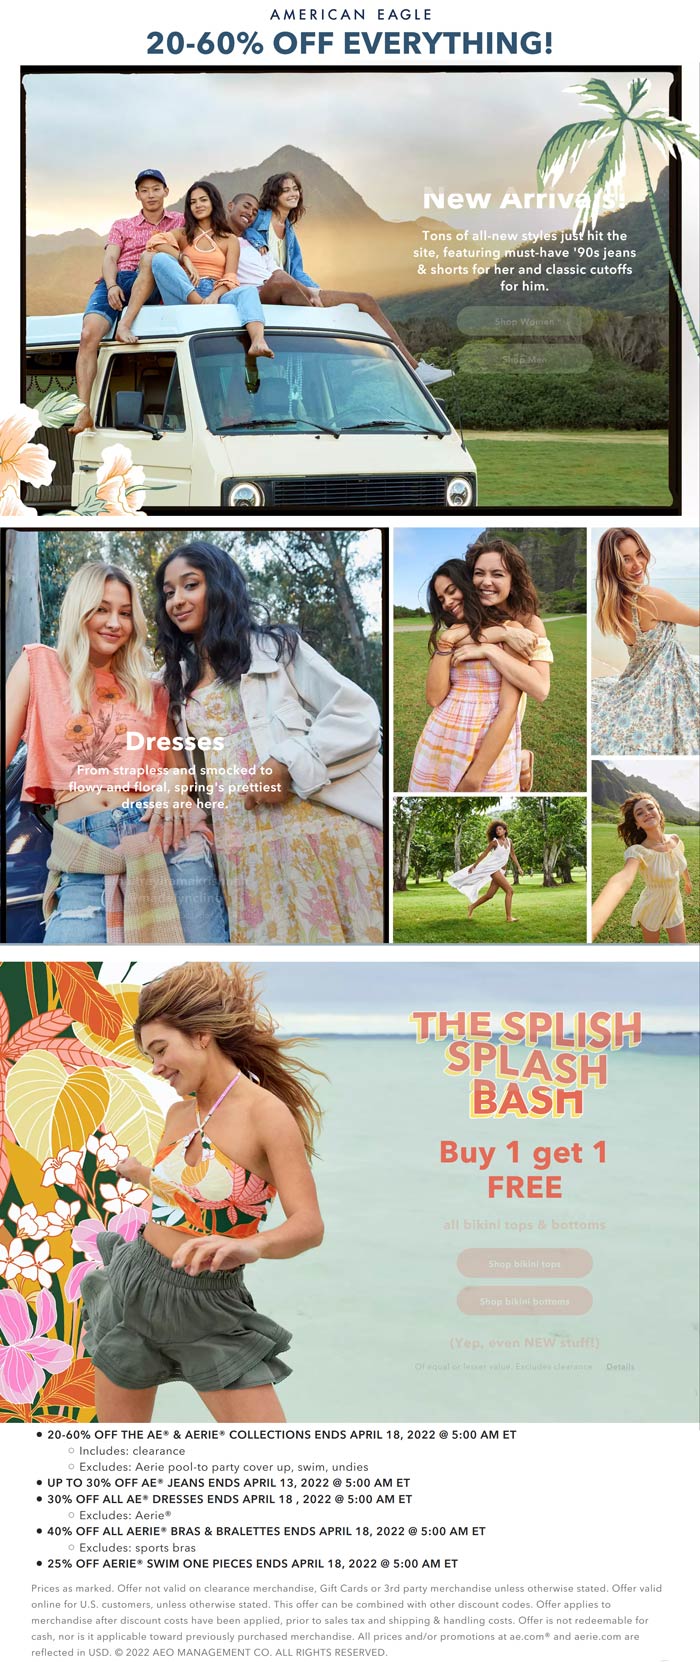 American Eagle stores Coupon  20-60% off everything & second bikini top or bottom free at American Eagle, ditto online #americaneagle 